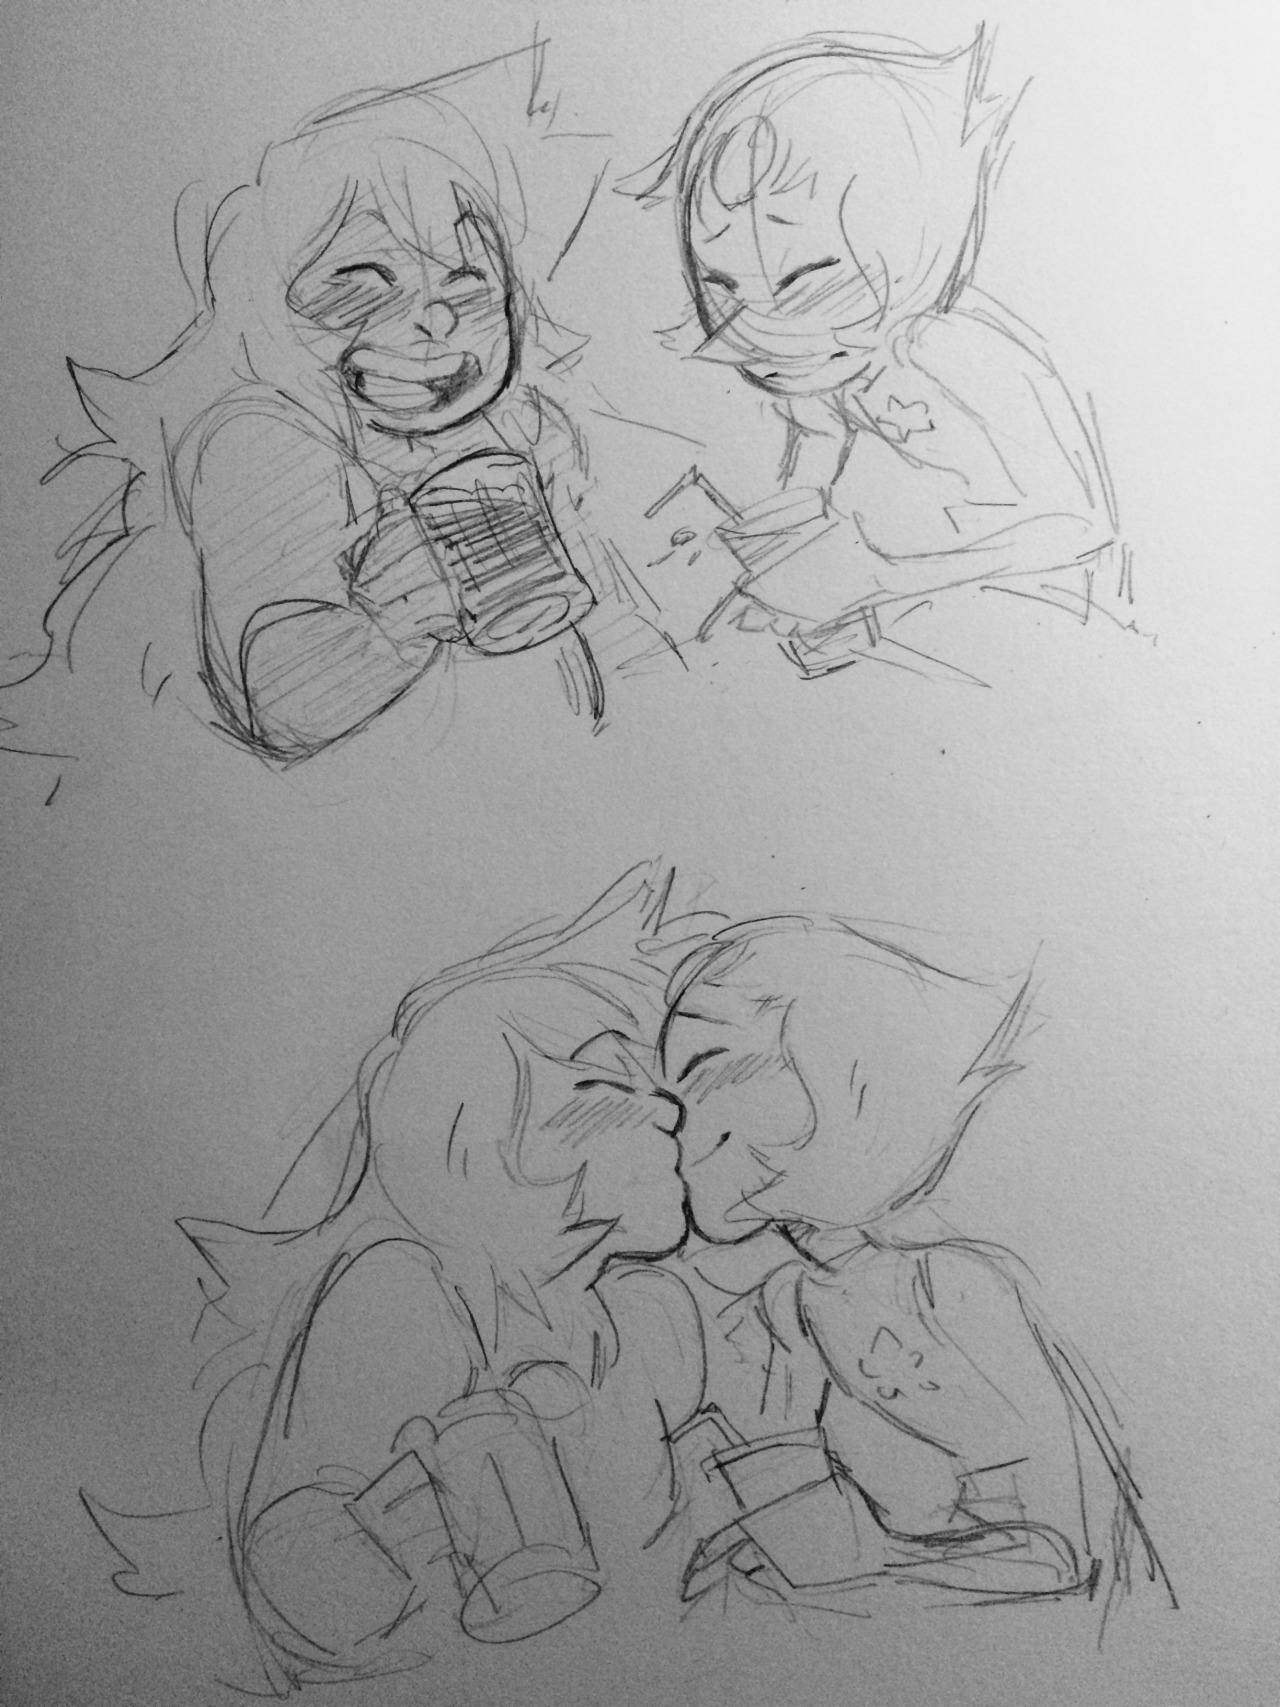 Drunk me drawing pearl and amethyst also drunk